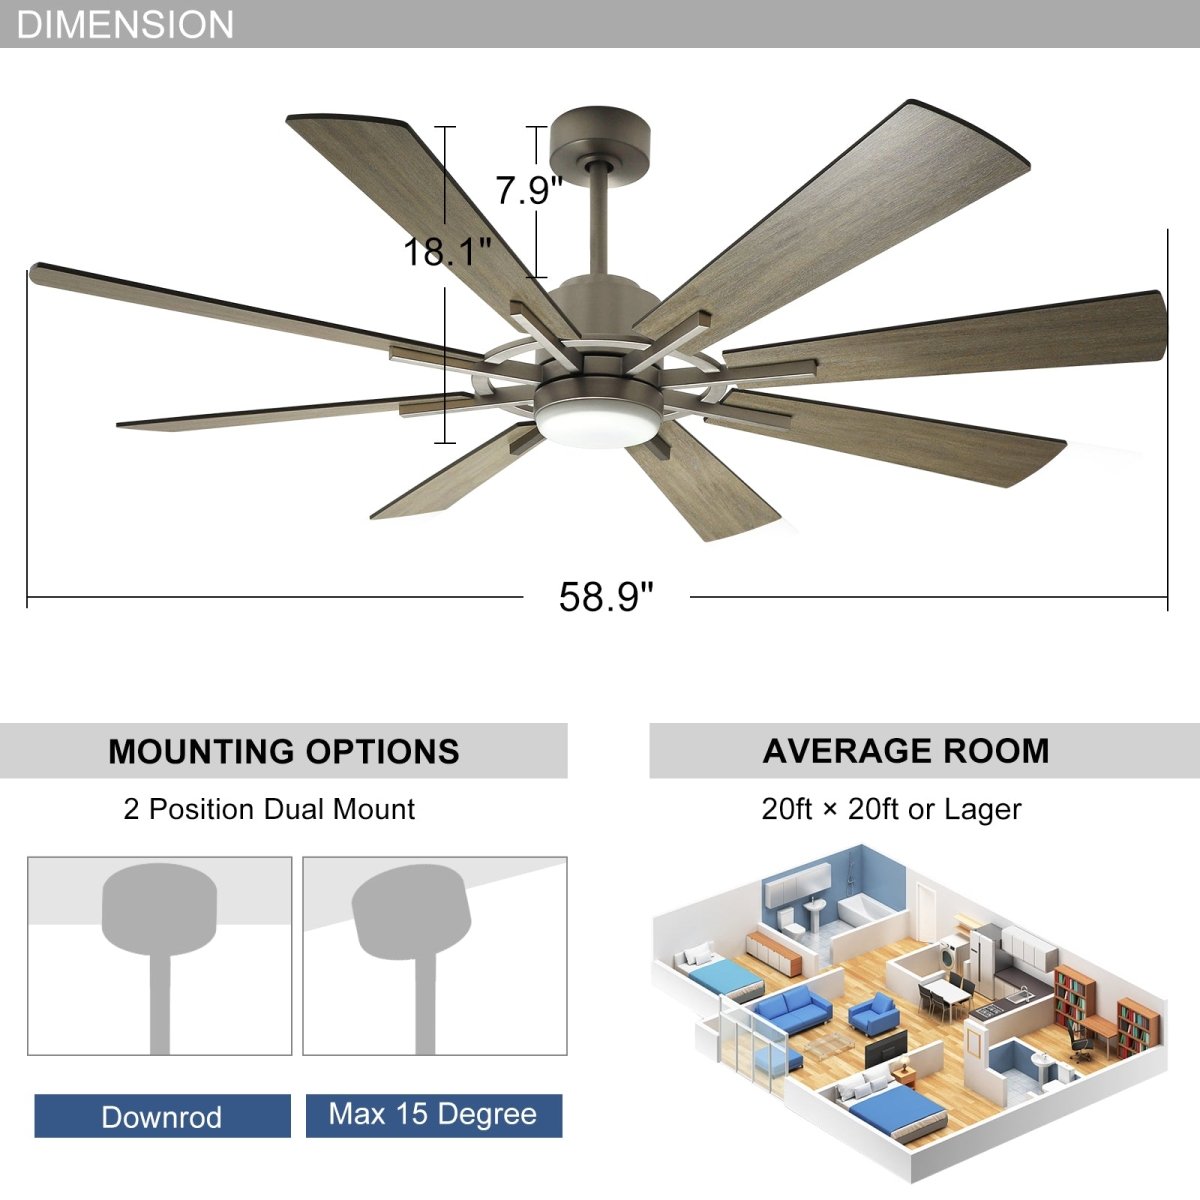 Depuley Ceiling Fan with Lights, 60" Reversible Large Industrial Ceiling fan with 8 Plywood Blades, 3 Light Colors Fandelier Ceiling Fans with Remote for Indoor and Covered Outdoor, 5-Speed Timer Gray - WS-FPZ44-18C-GR 3 | DEPULEY